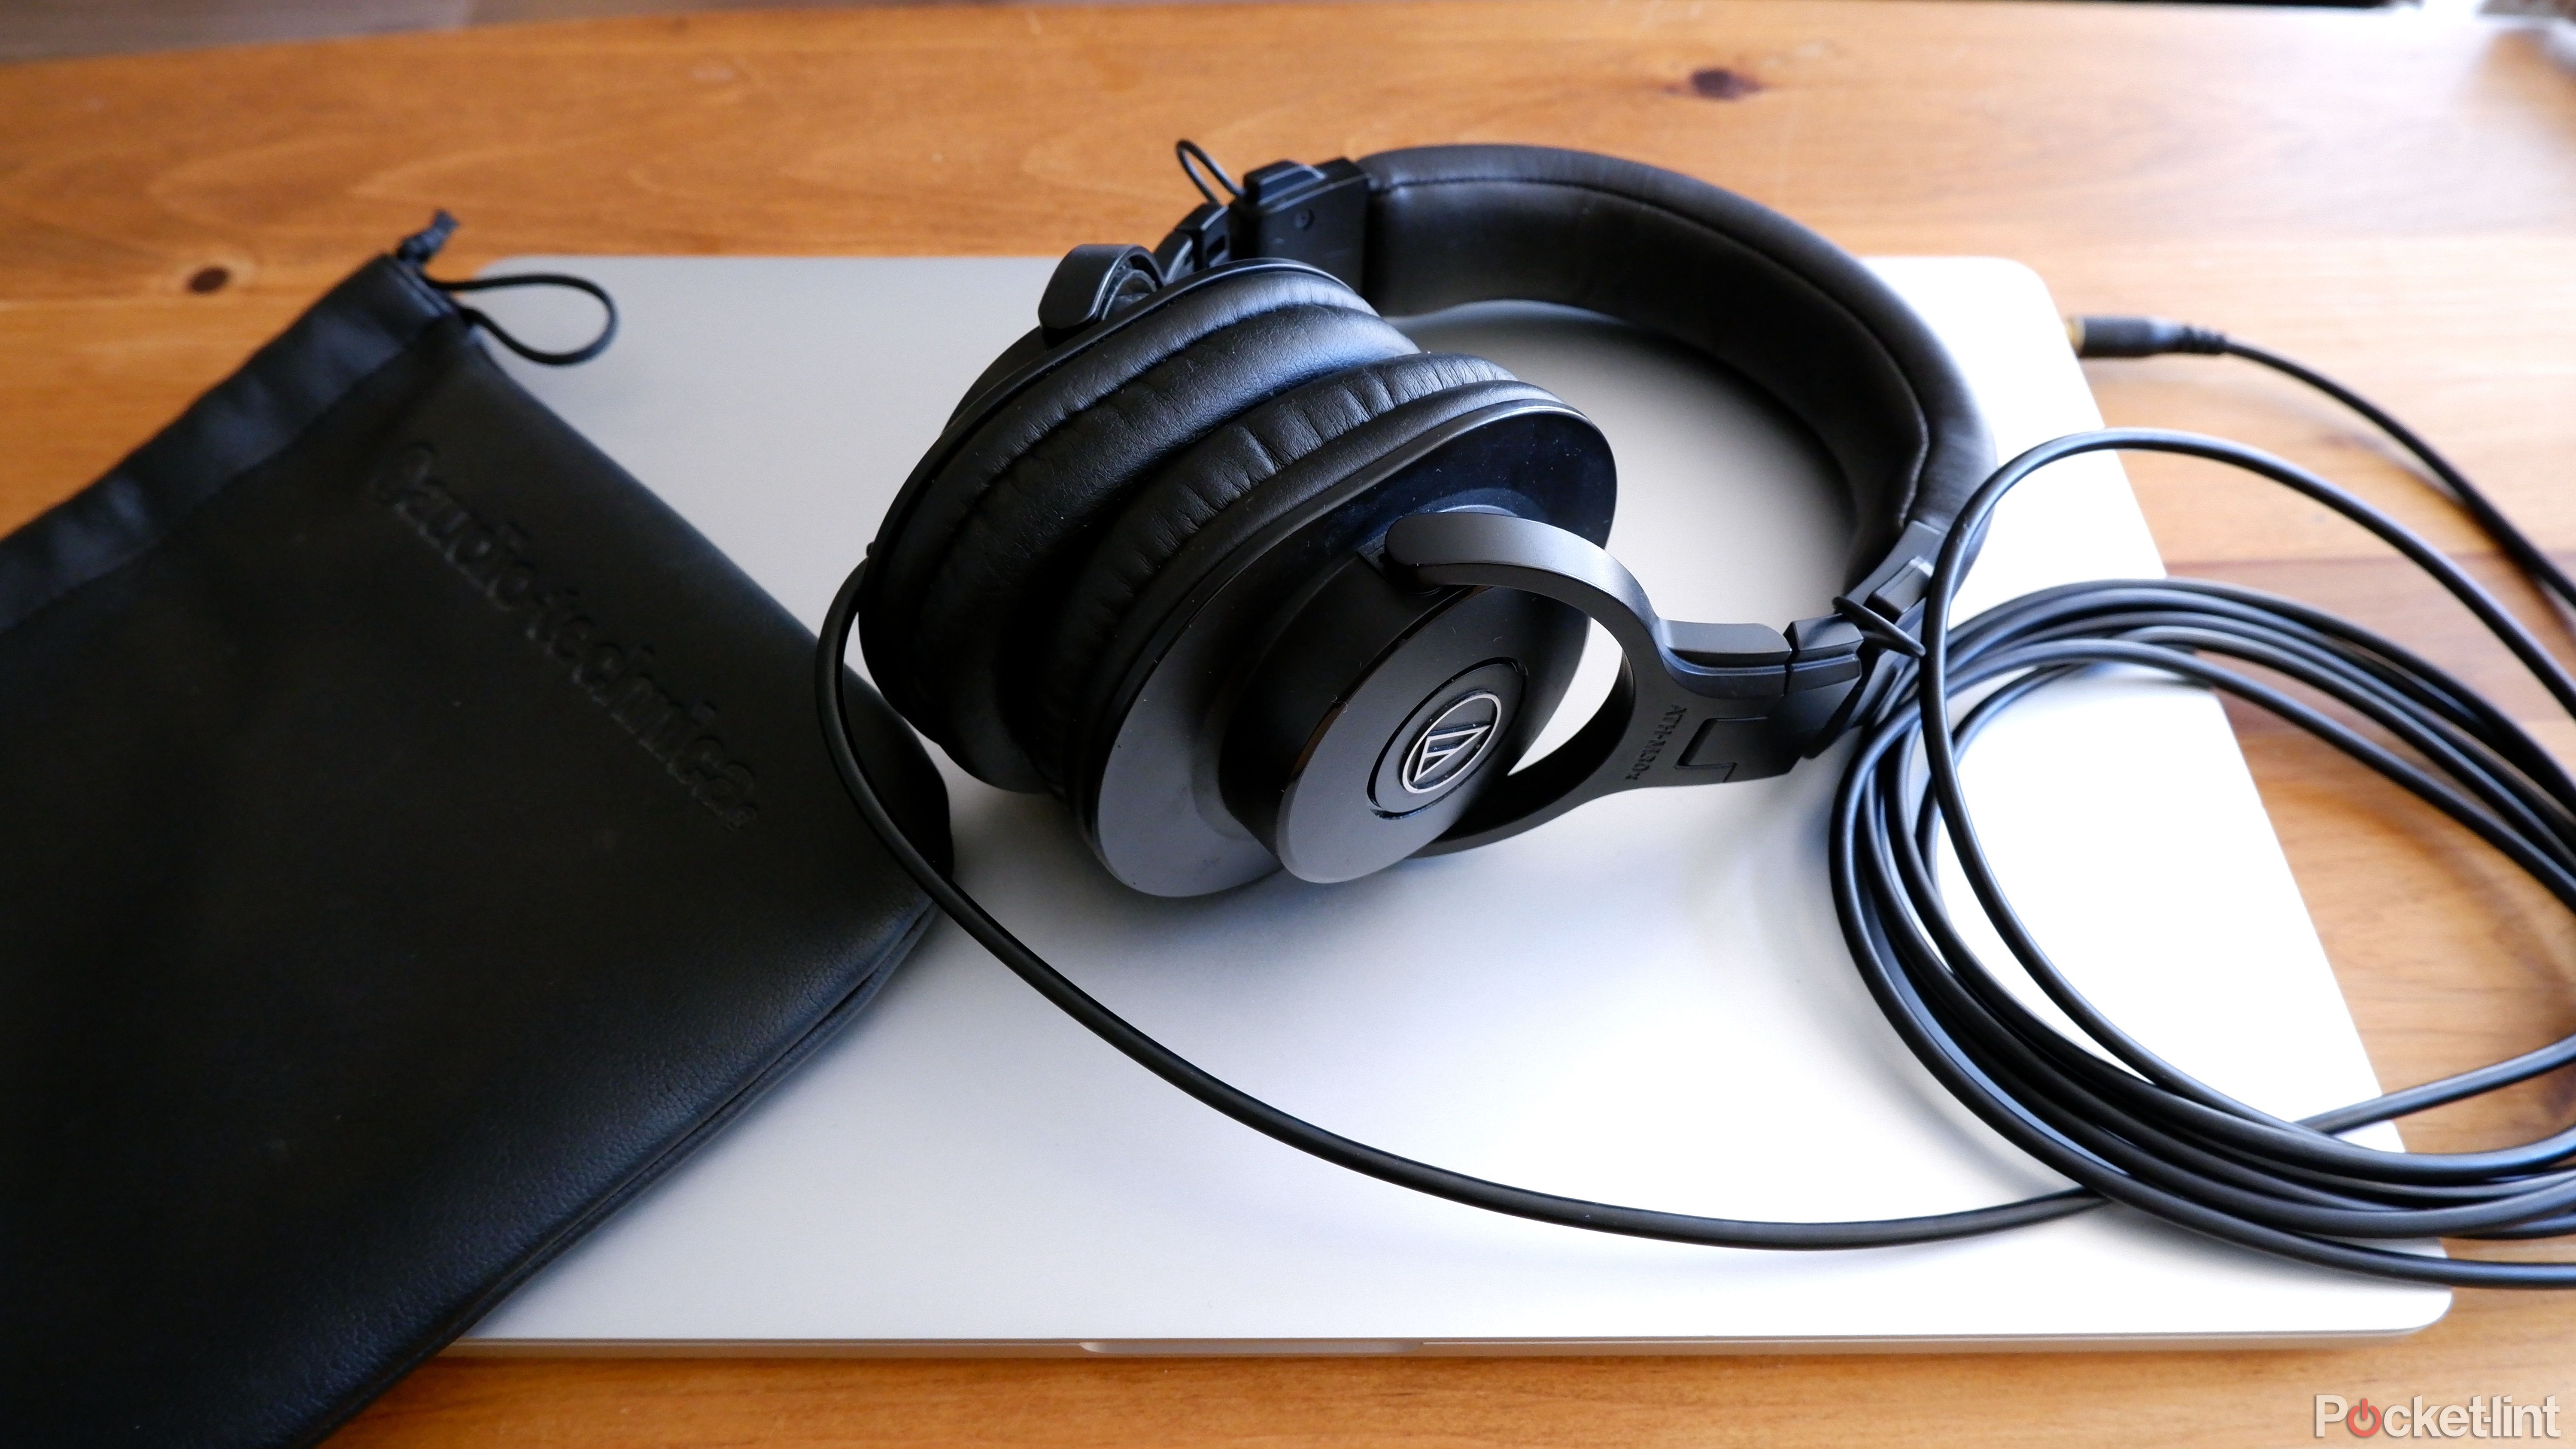 The Audio-Technica ATH-M30x plugged into a Macbook Pro, with the soft case beside it.